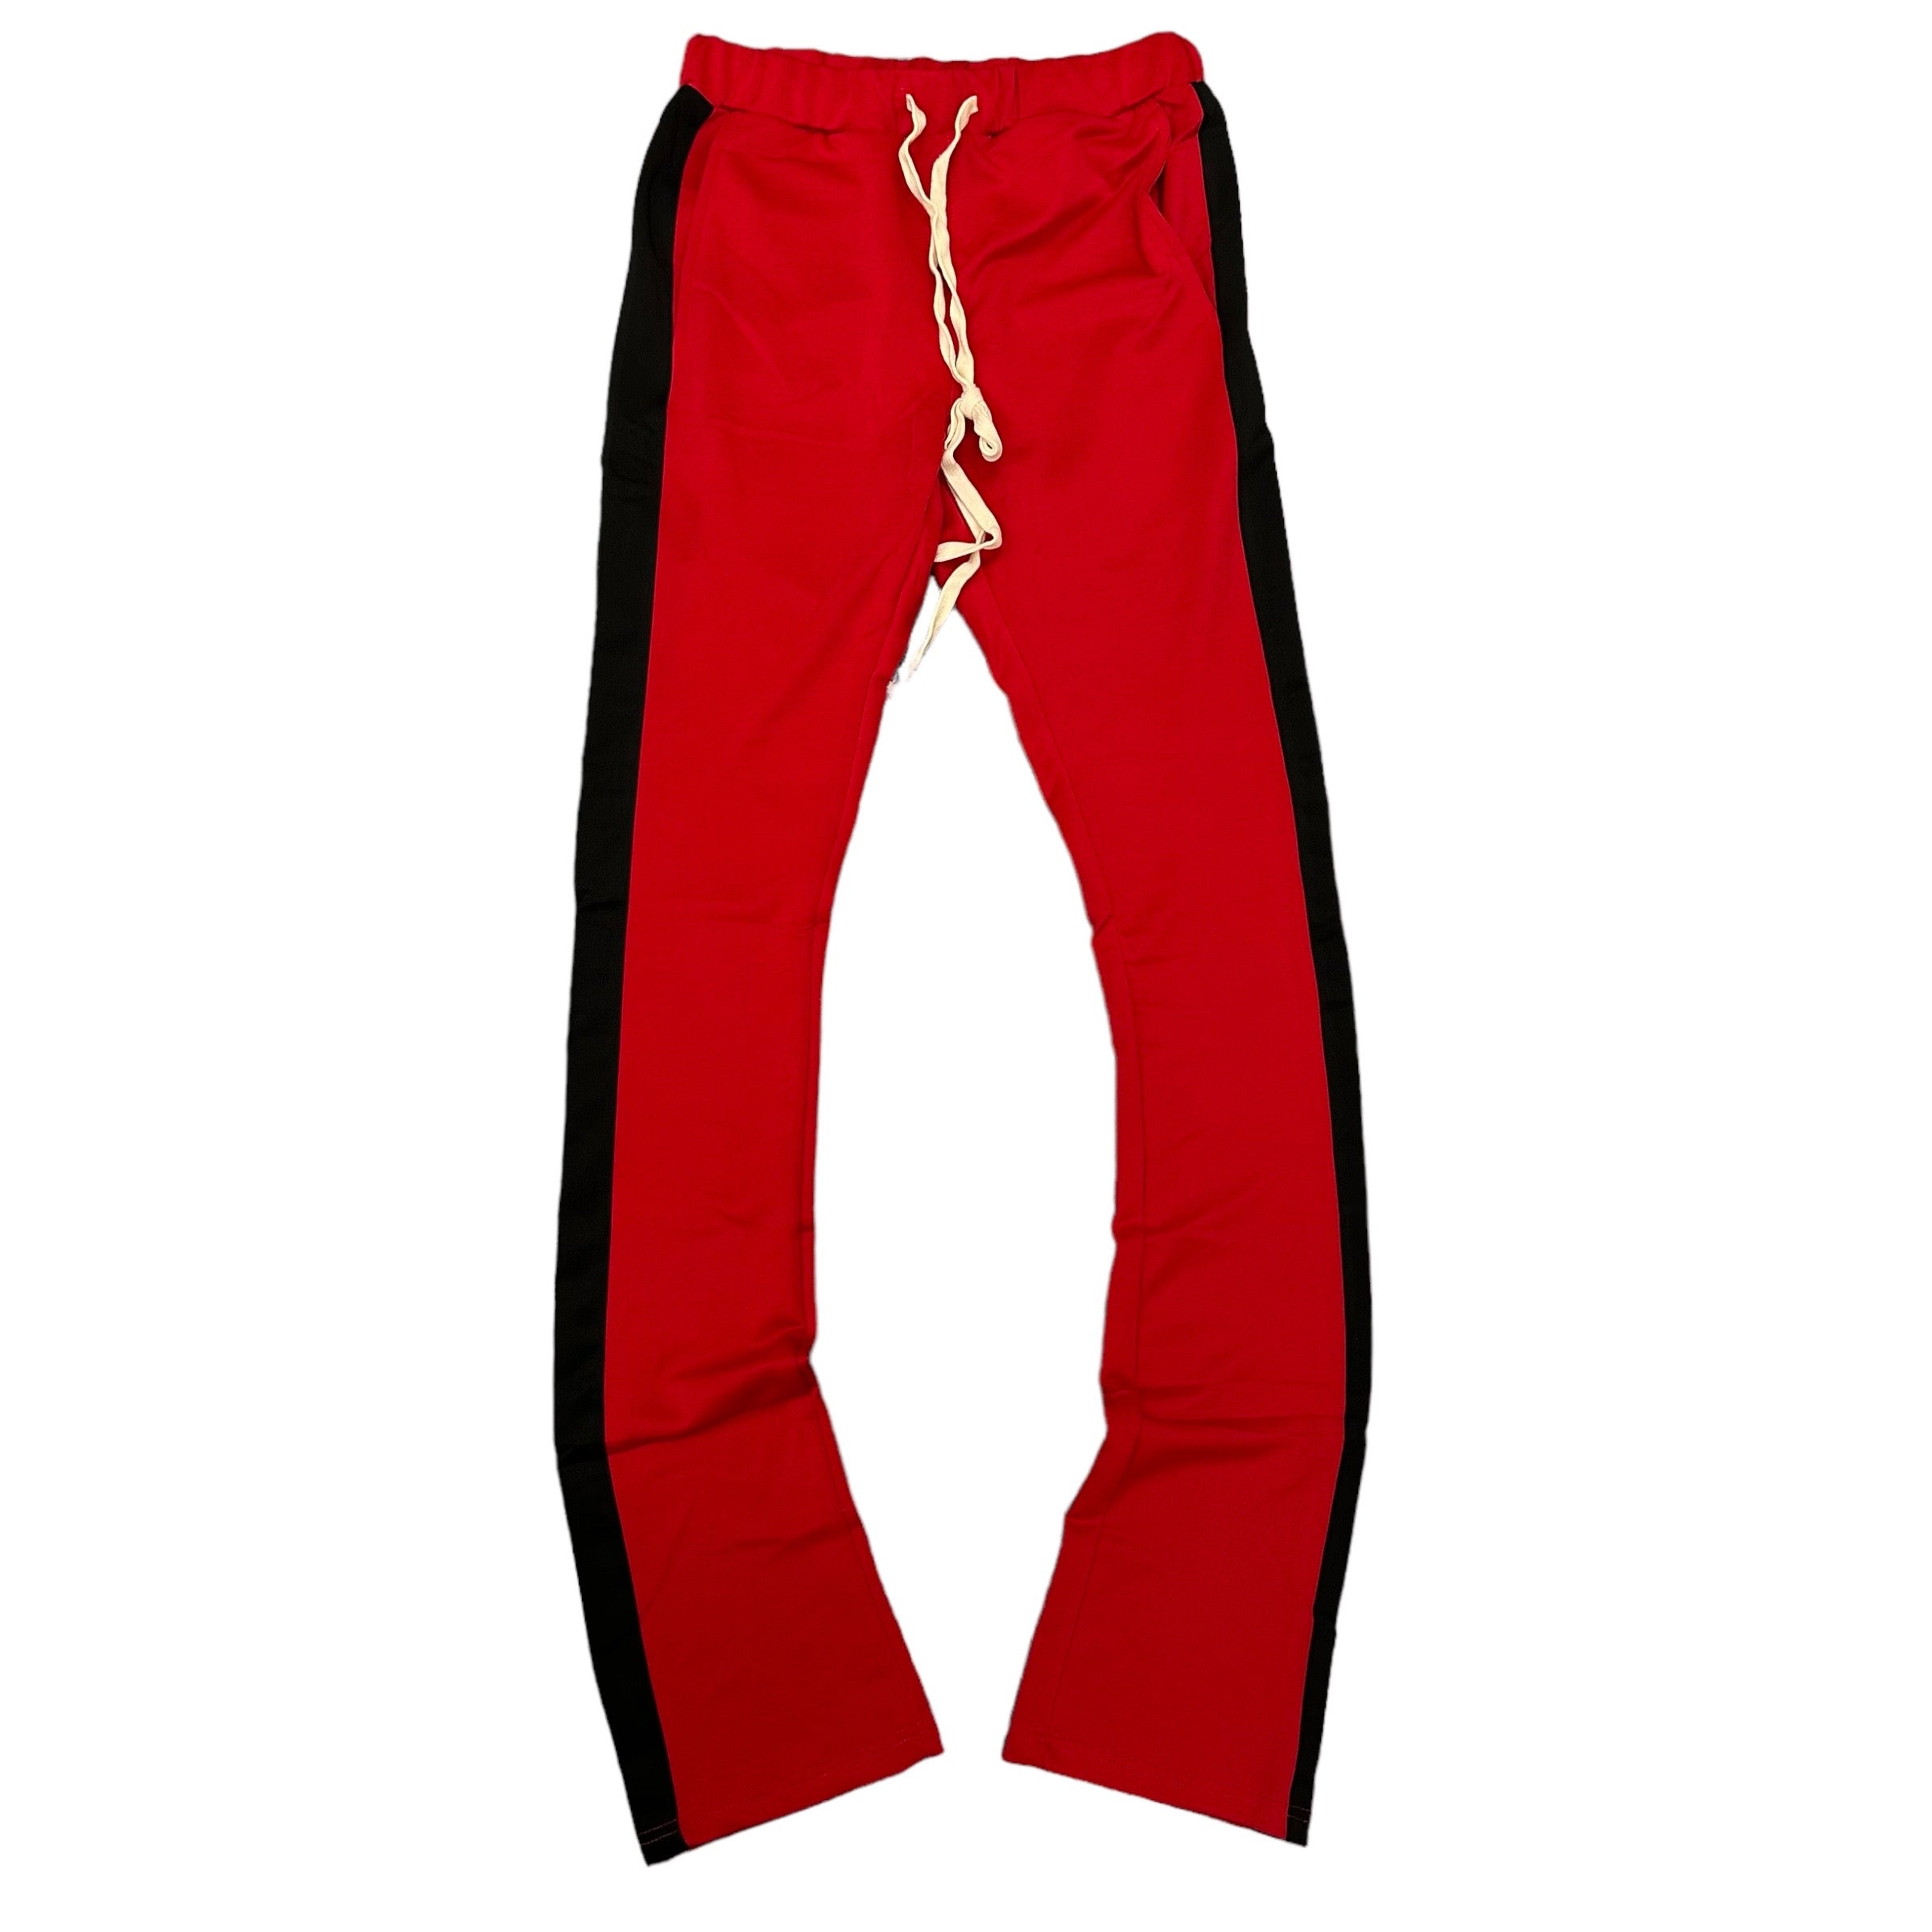 Ckel Stacked Track Pants Red Black 555